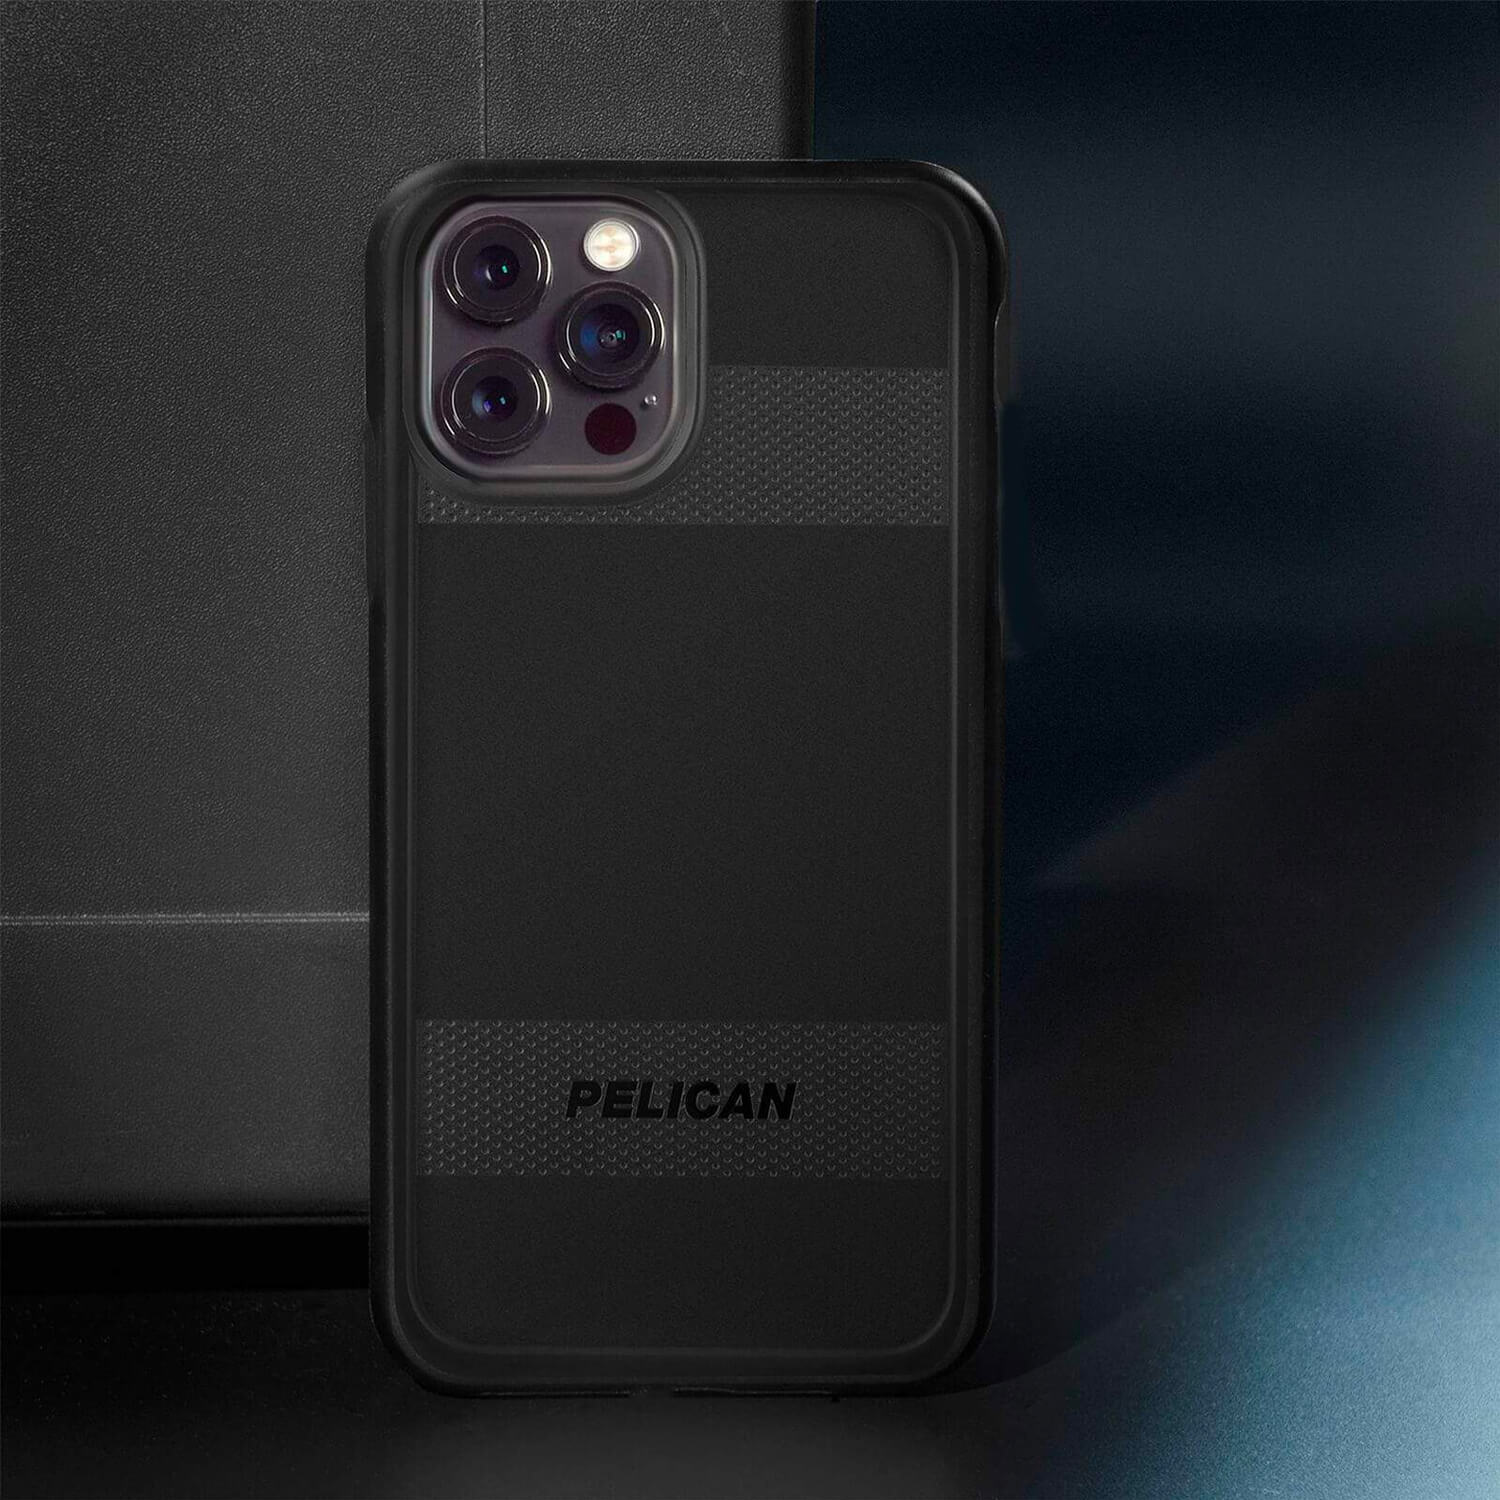 Pelican iPhone 13 Pro Case Protector Antimicrobial Black